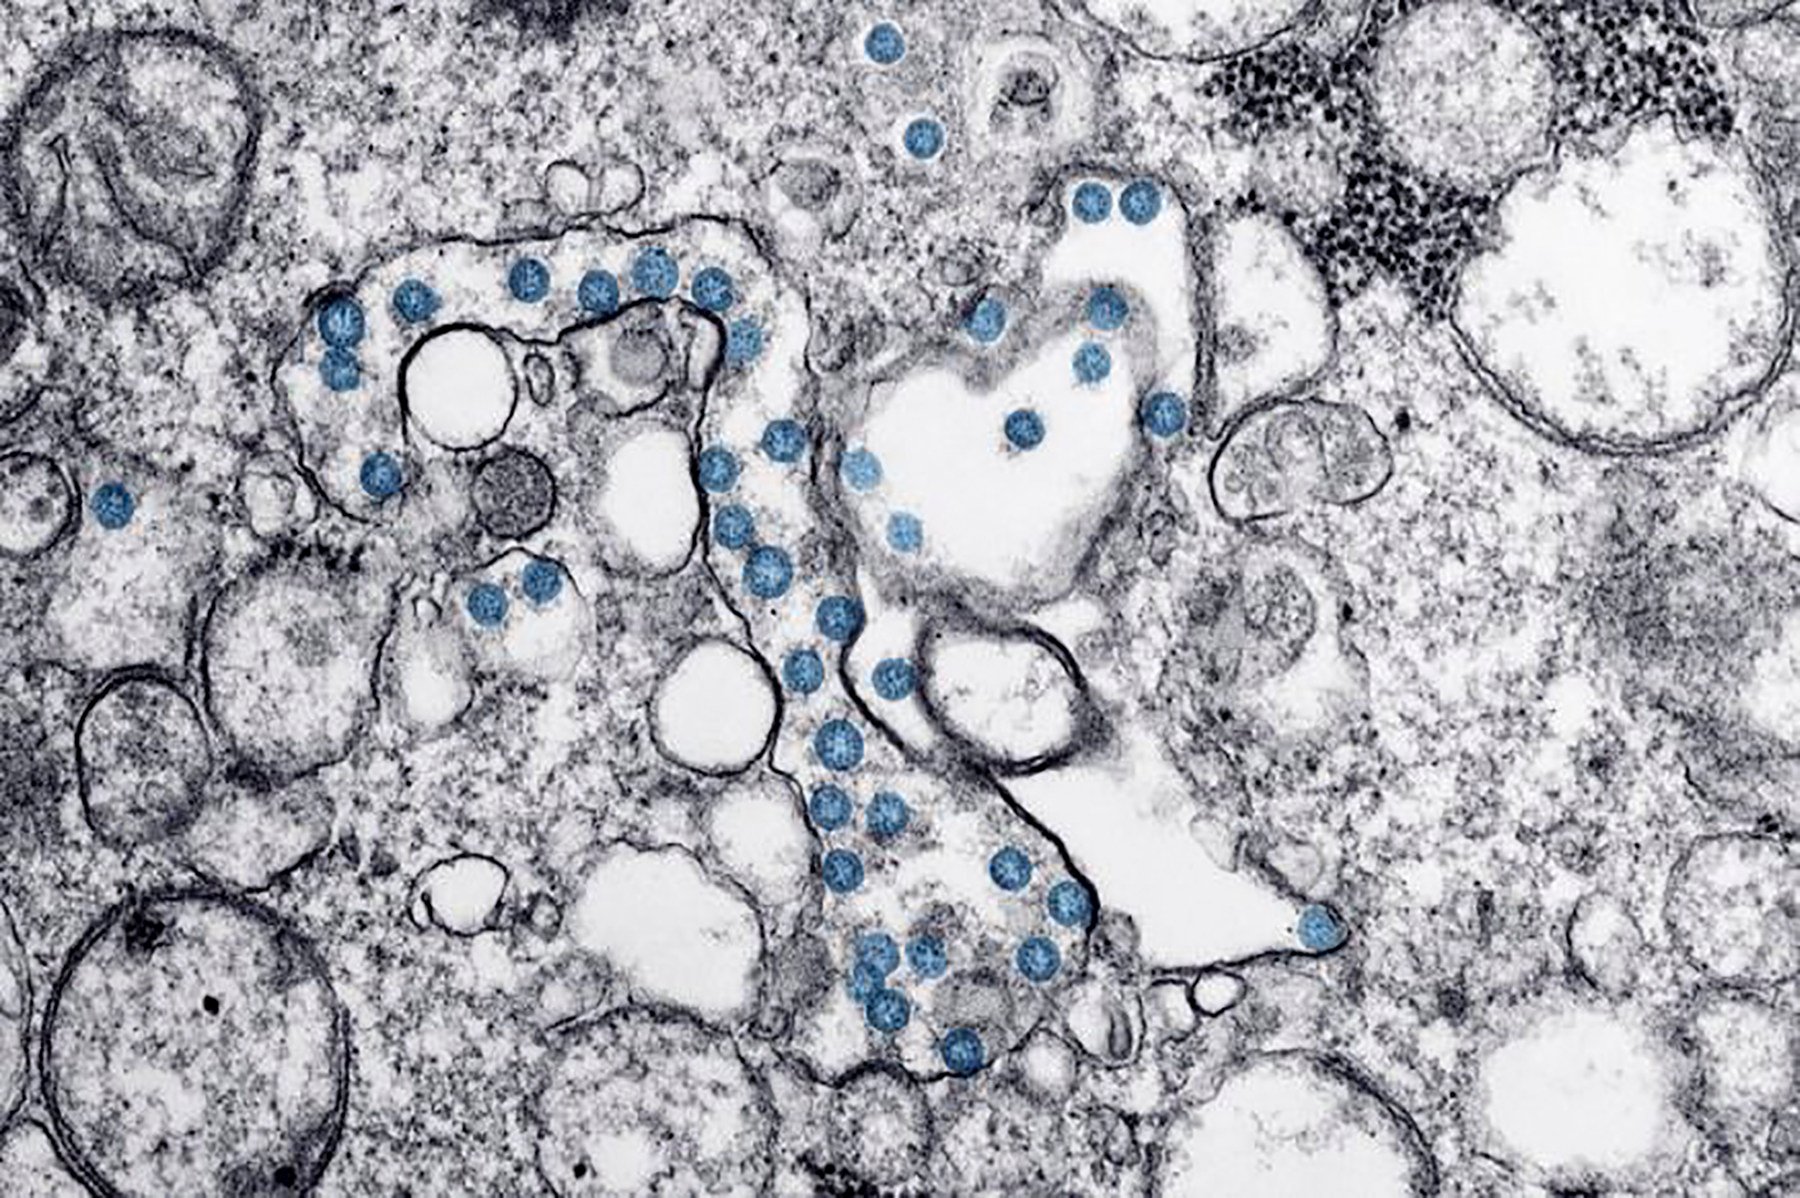 A microscopic image from February 2020, provided by the US Centres for Disease Control and Prevention, shows an isolate from the first US case of Covid-19. Photo: US Centres for Disease Control and Prevention via AFP